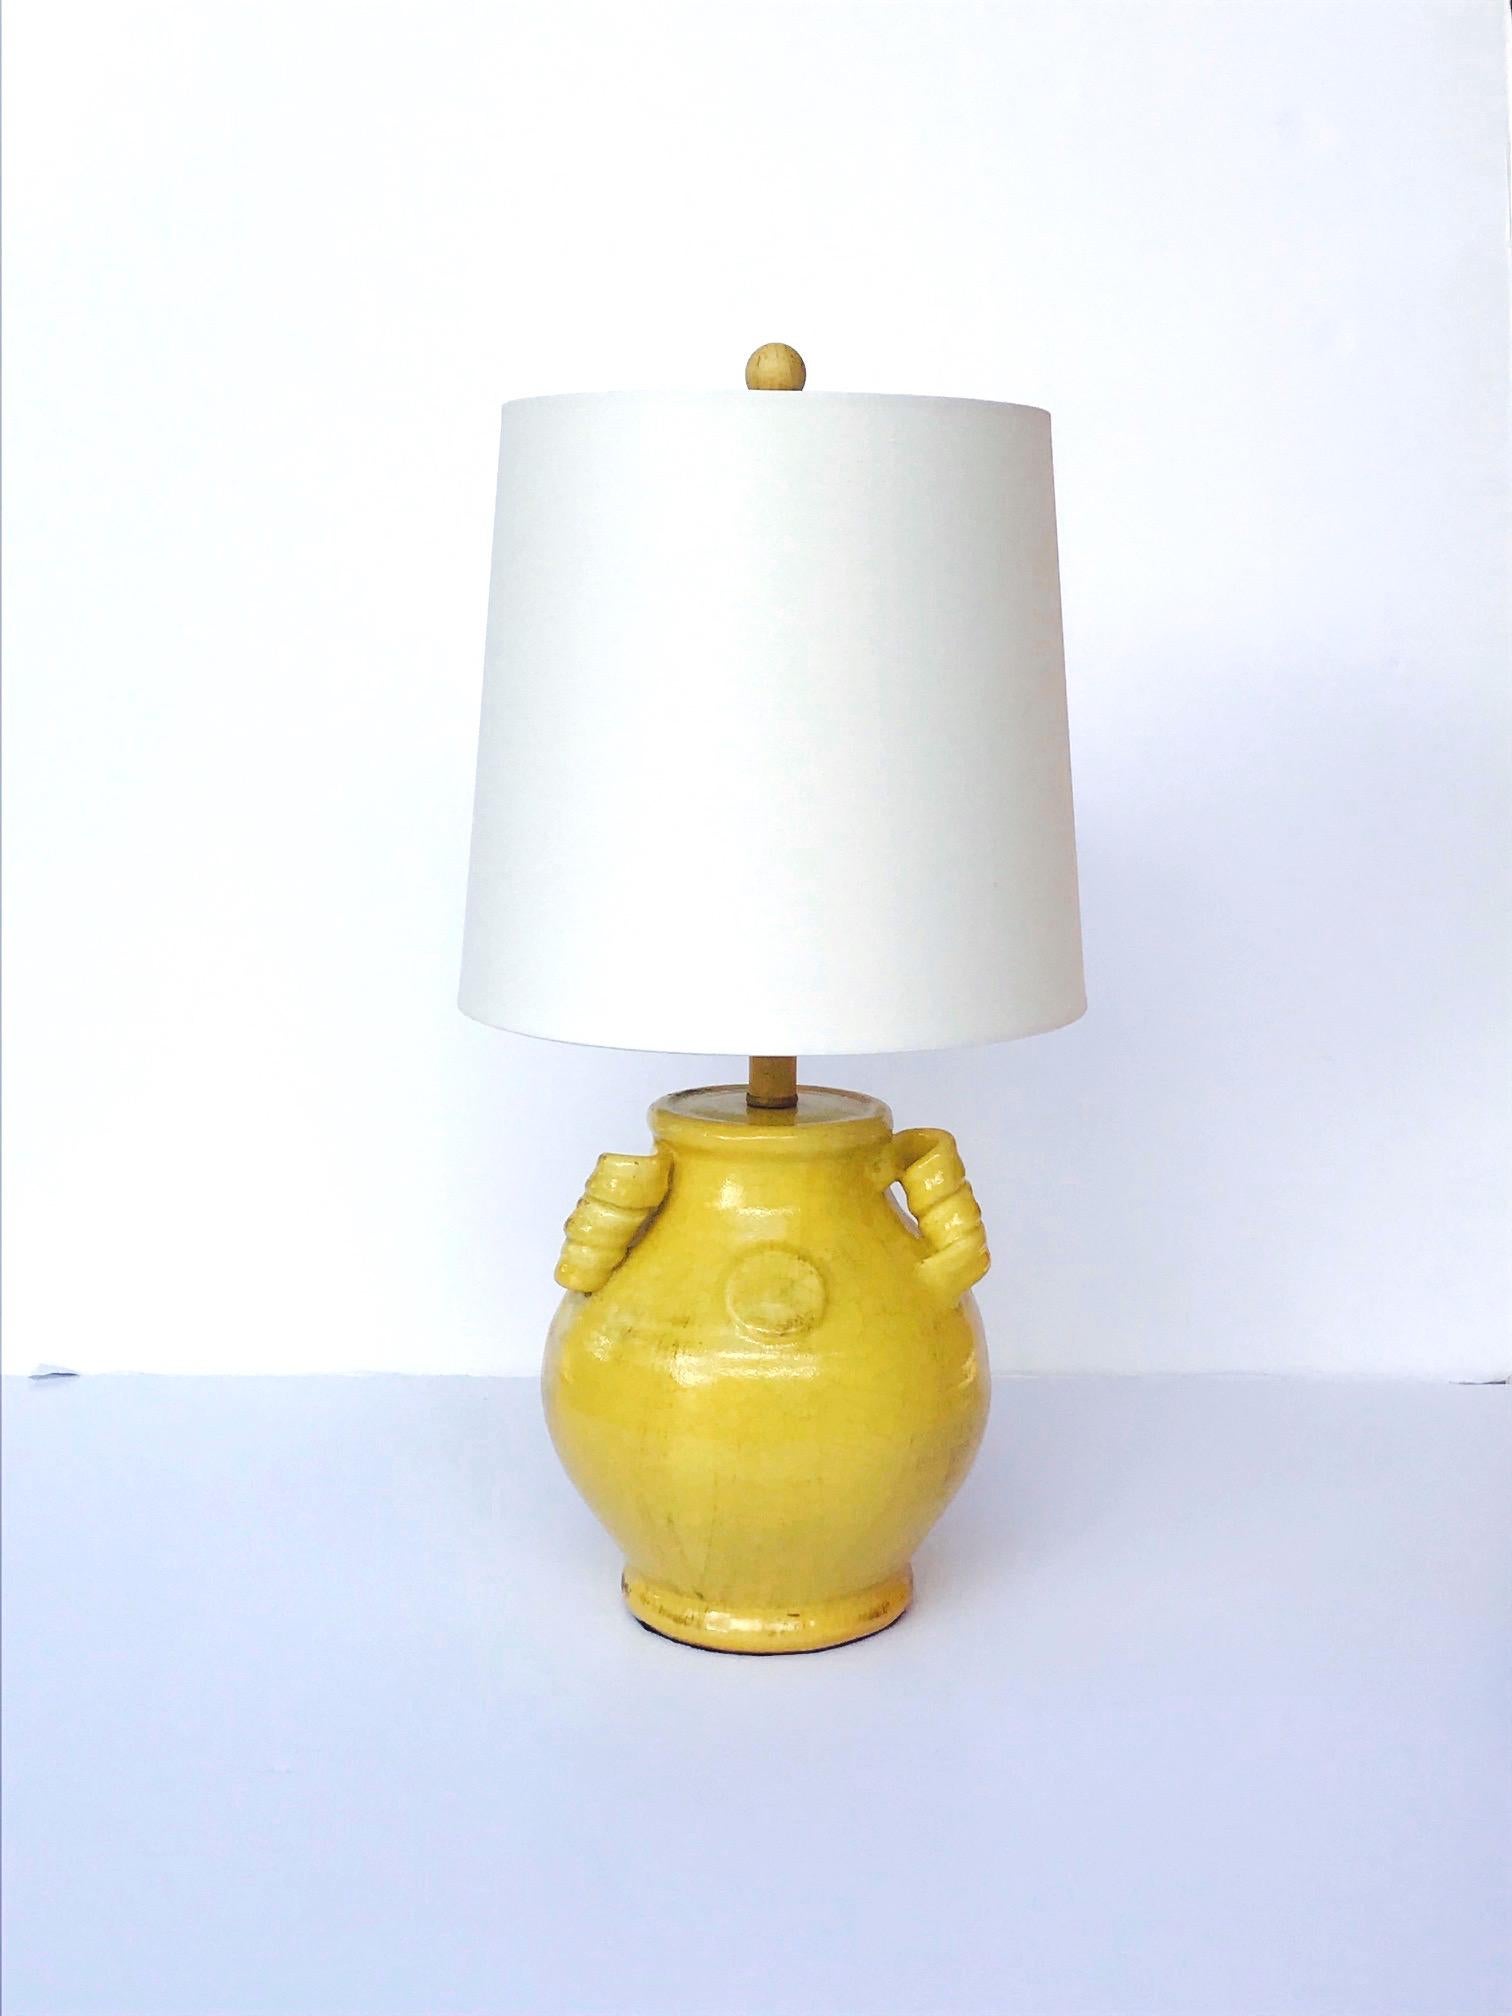 Glazed Pair of Vintage Chinese Pottery Lamps with Antique Yellow Glaze, c. 1980's